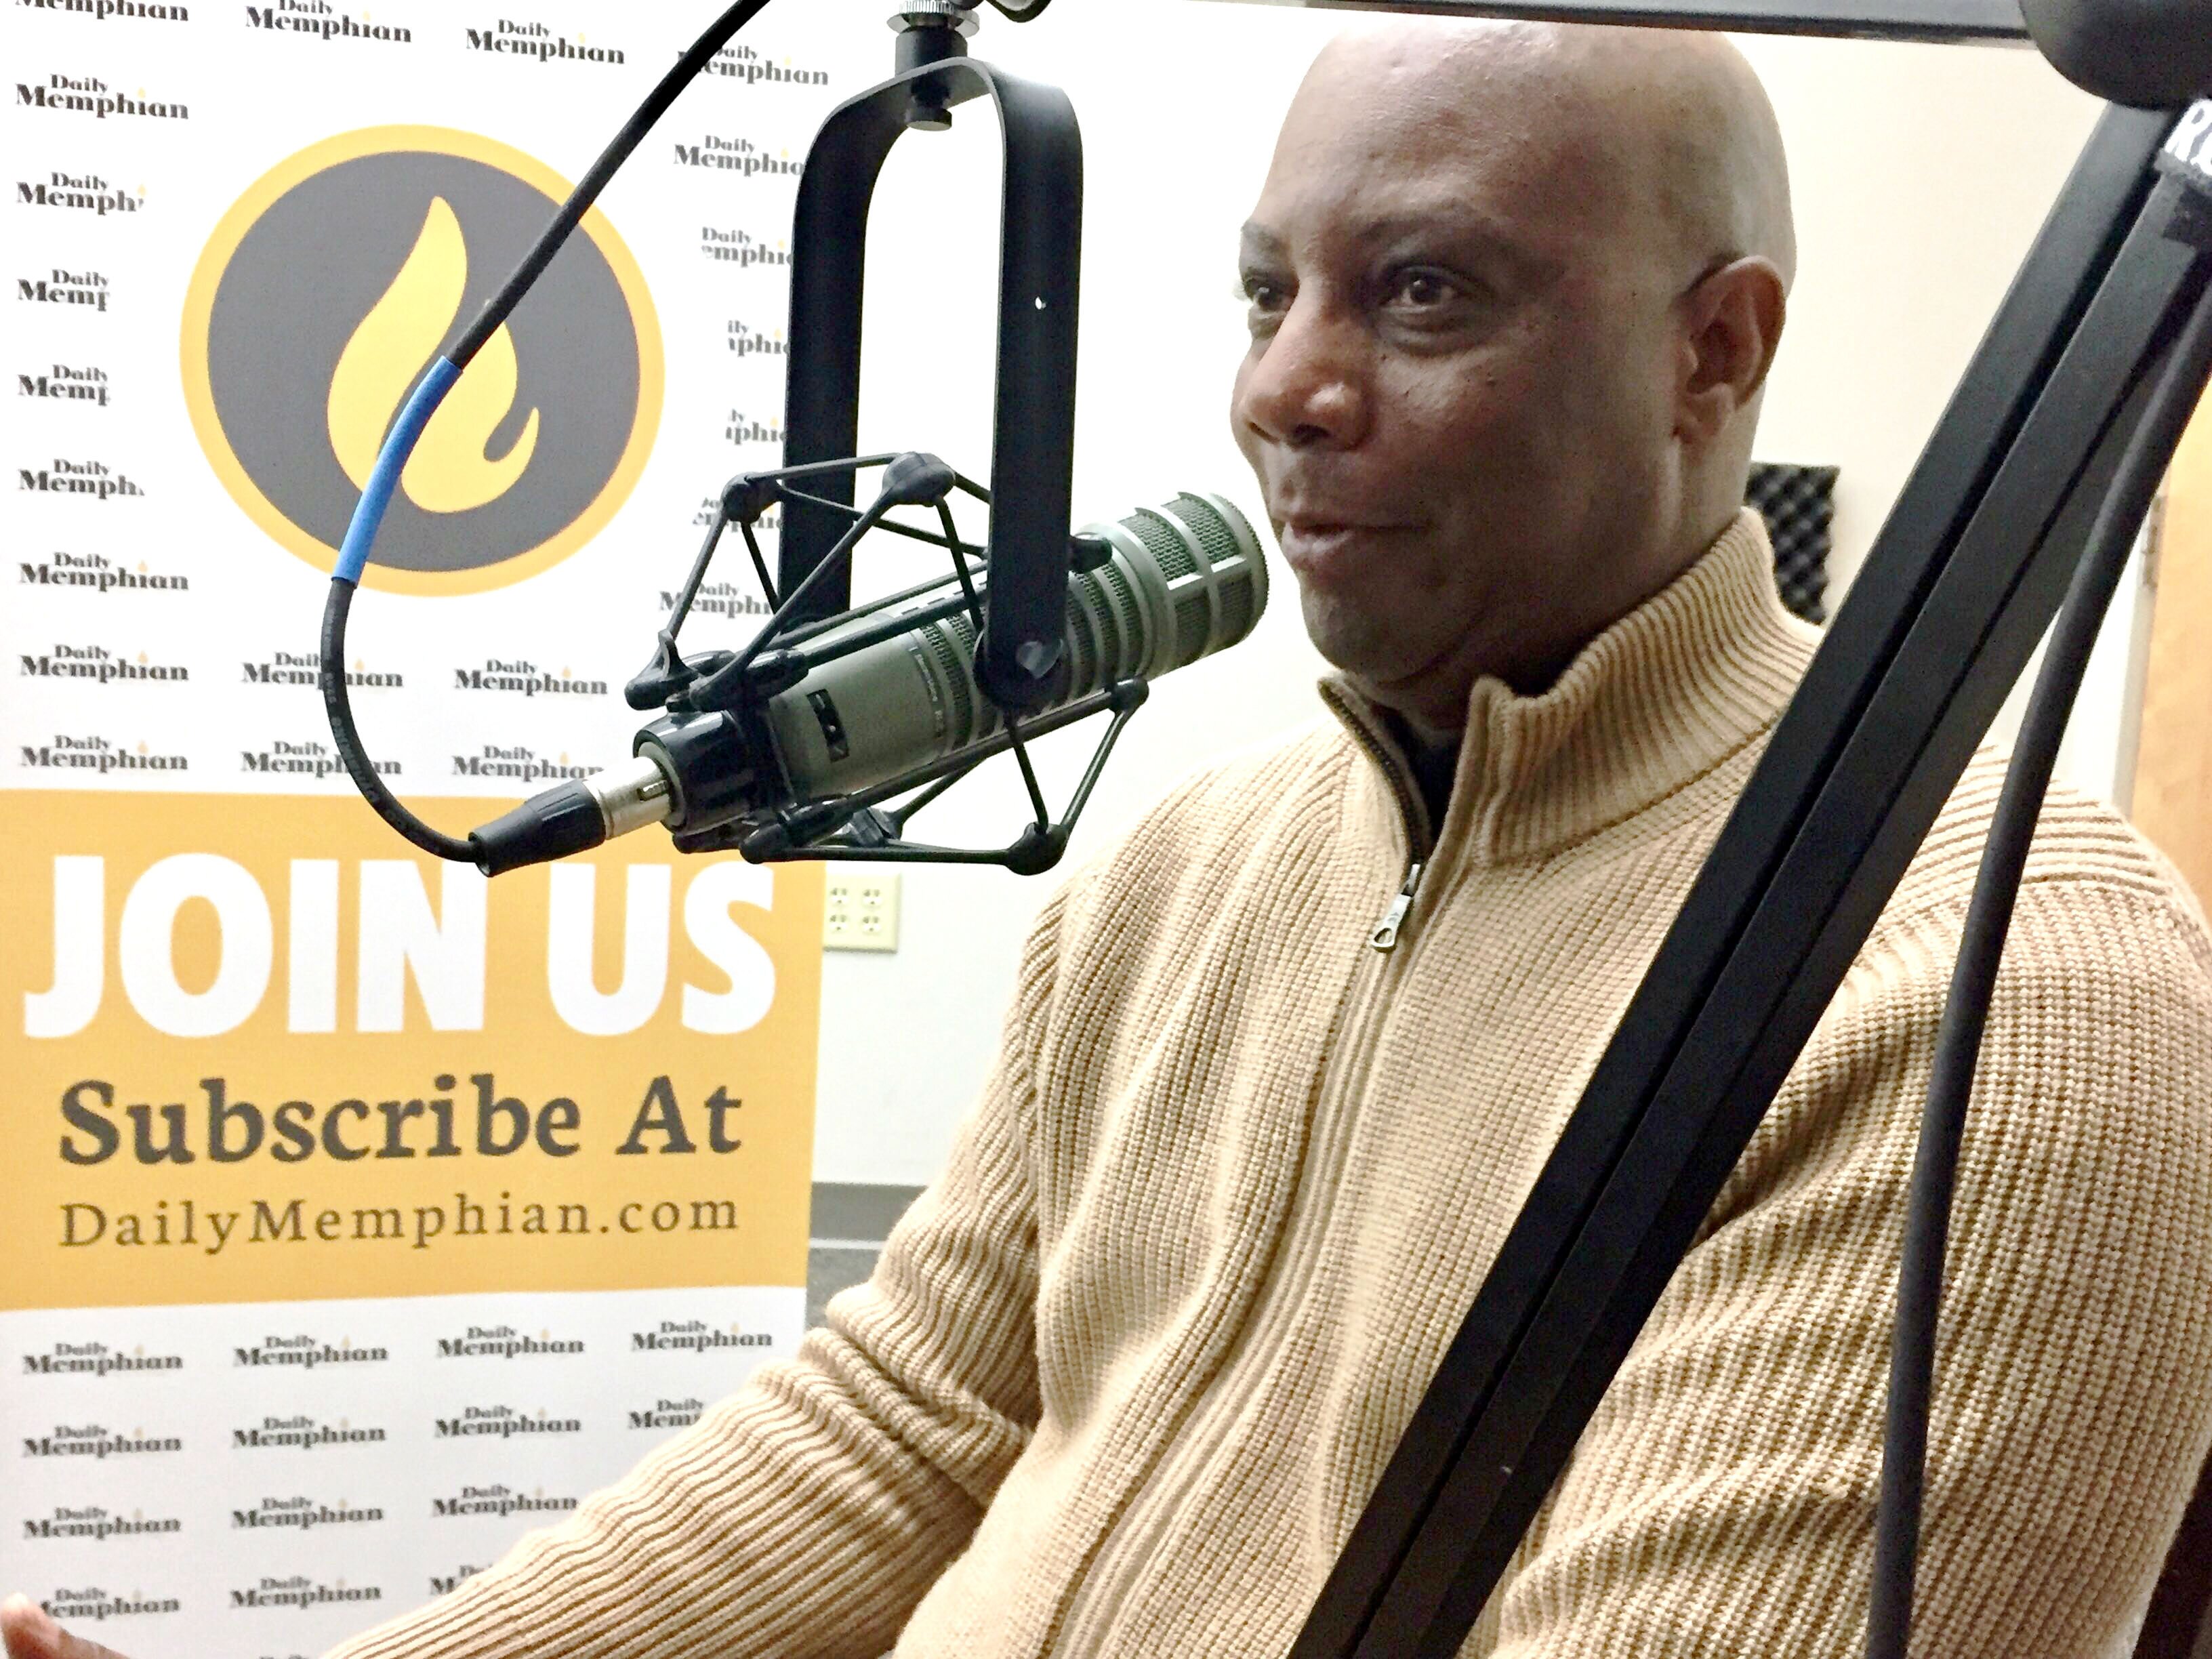 Mary Ward and Cornelius Sander (pictured) with Promise CDC talk community and development in North Memphis on the High Ground News On the Ground Podcast. (Natalie Van Gundy) 